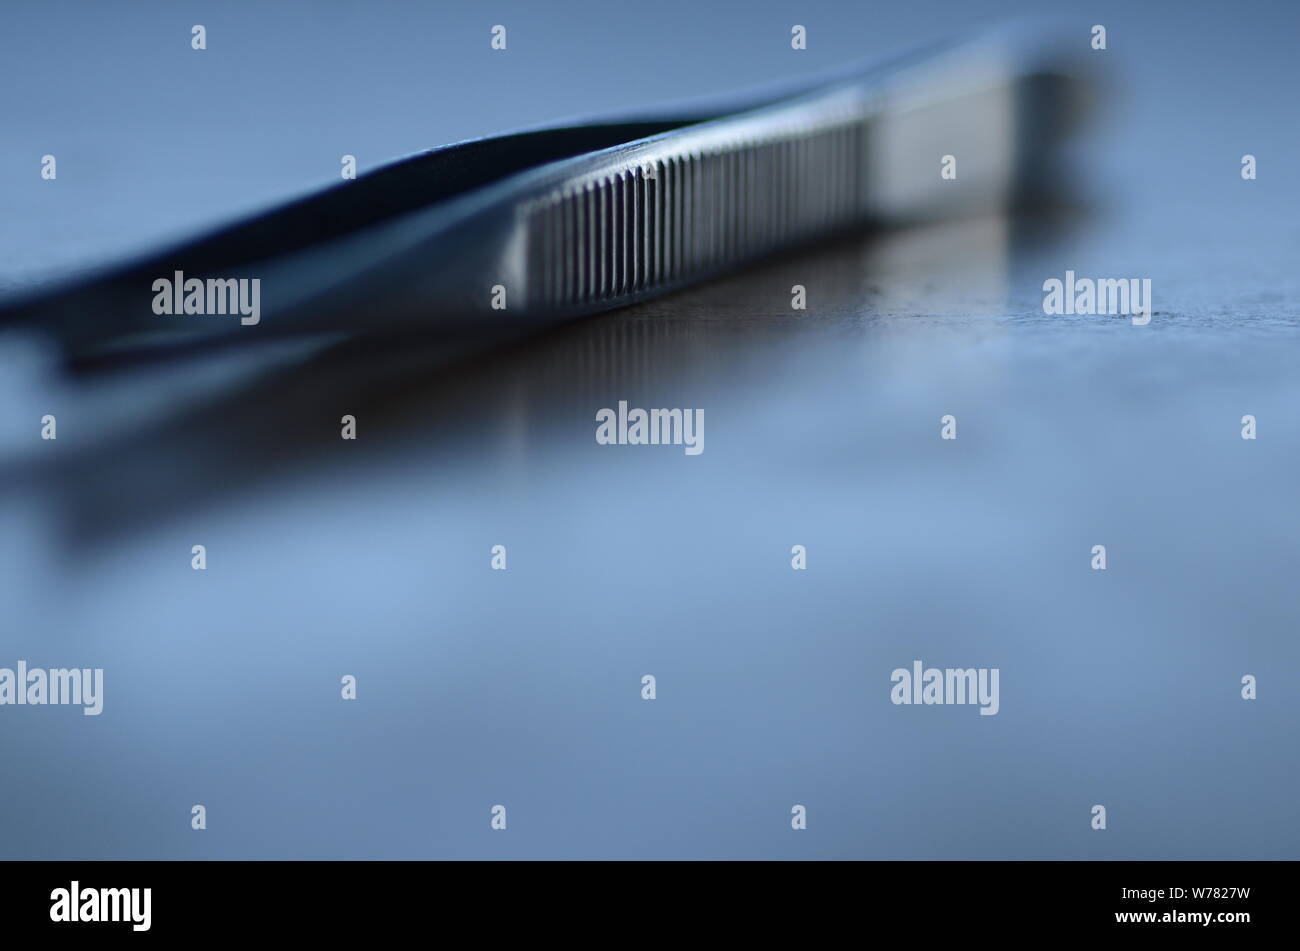 ER: A pair of tweezers to be utilized in an operation sits on a surgical tray. Stock Photo